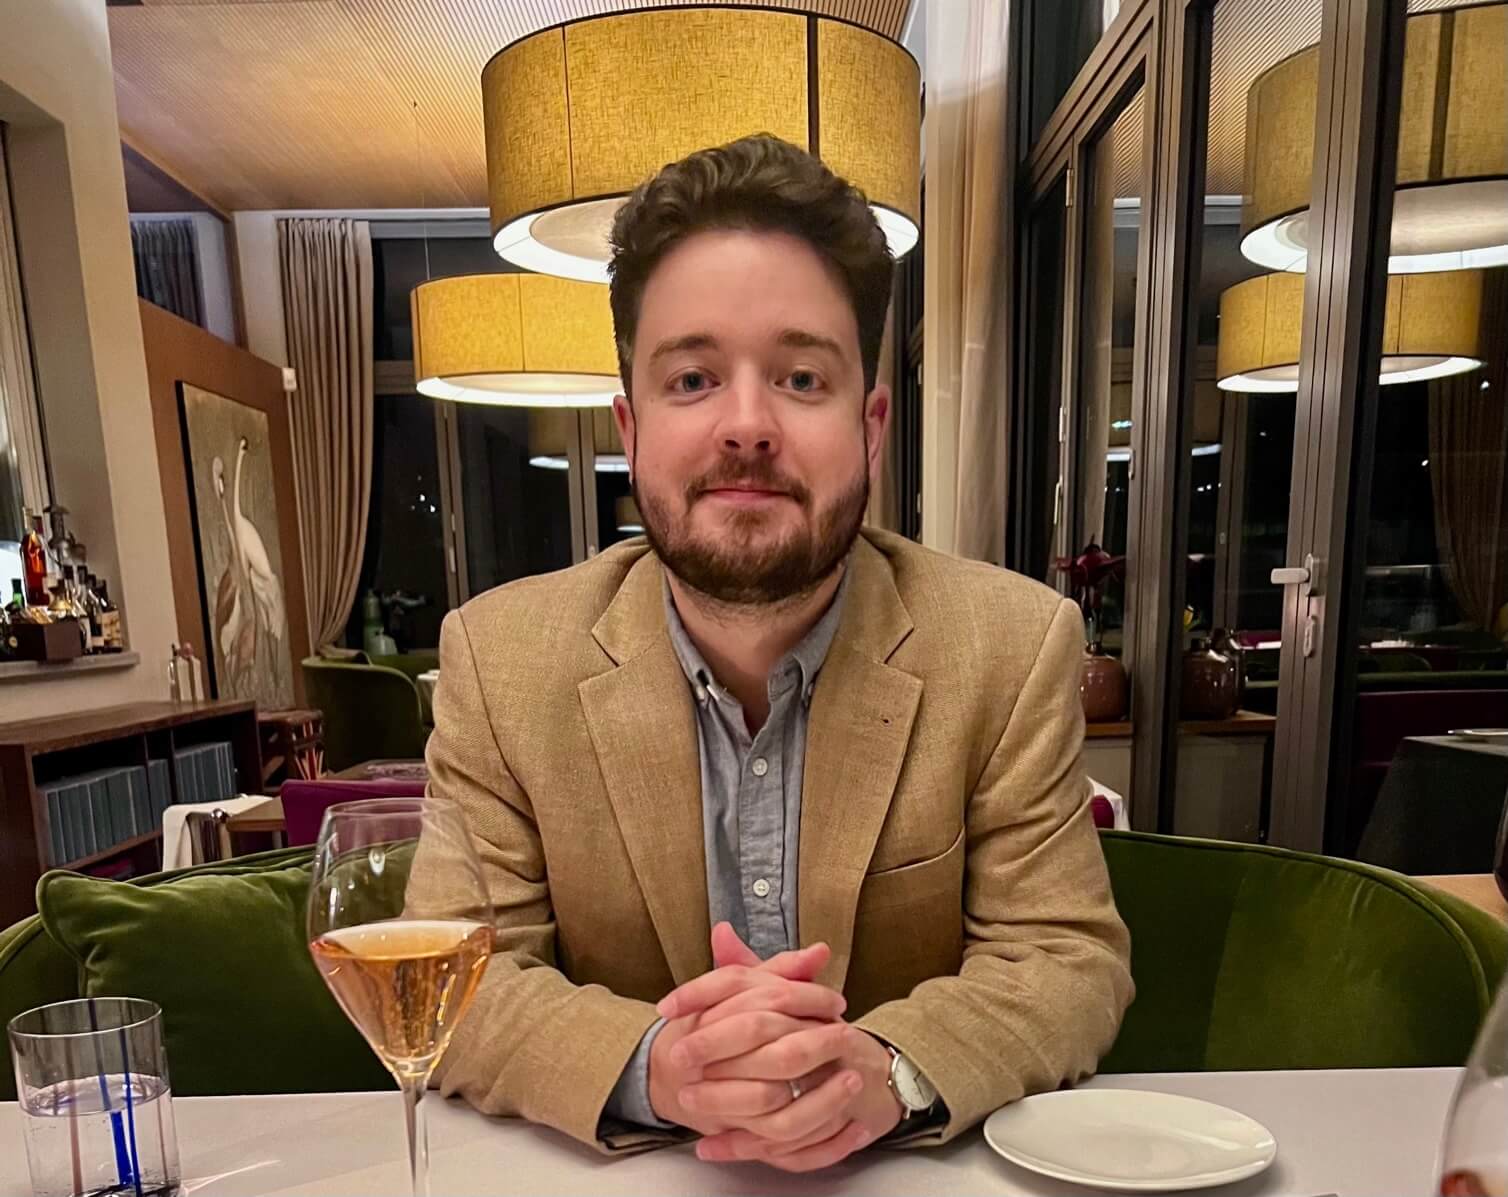 Jack Babb sits at a table in a restaurant setting. His forearms and hands are on the table. He has fair skin, dark brown hair, a beard and mustache. He is wearing a light tan sport coat and light grey shirt. 